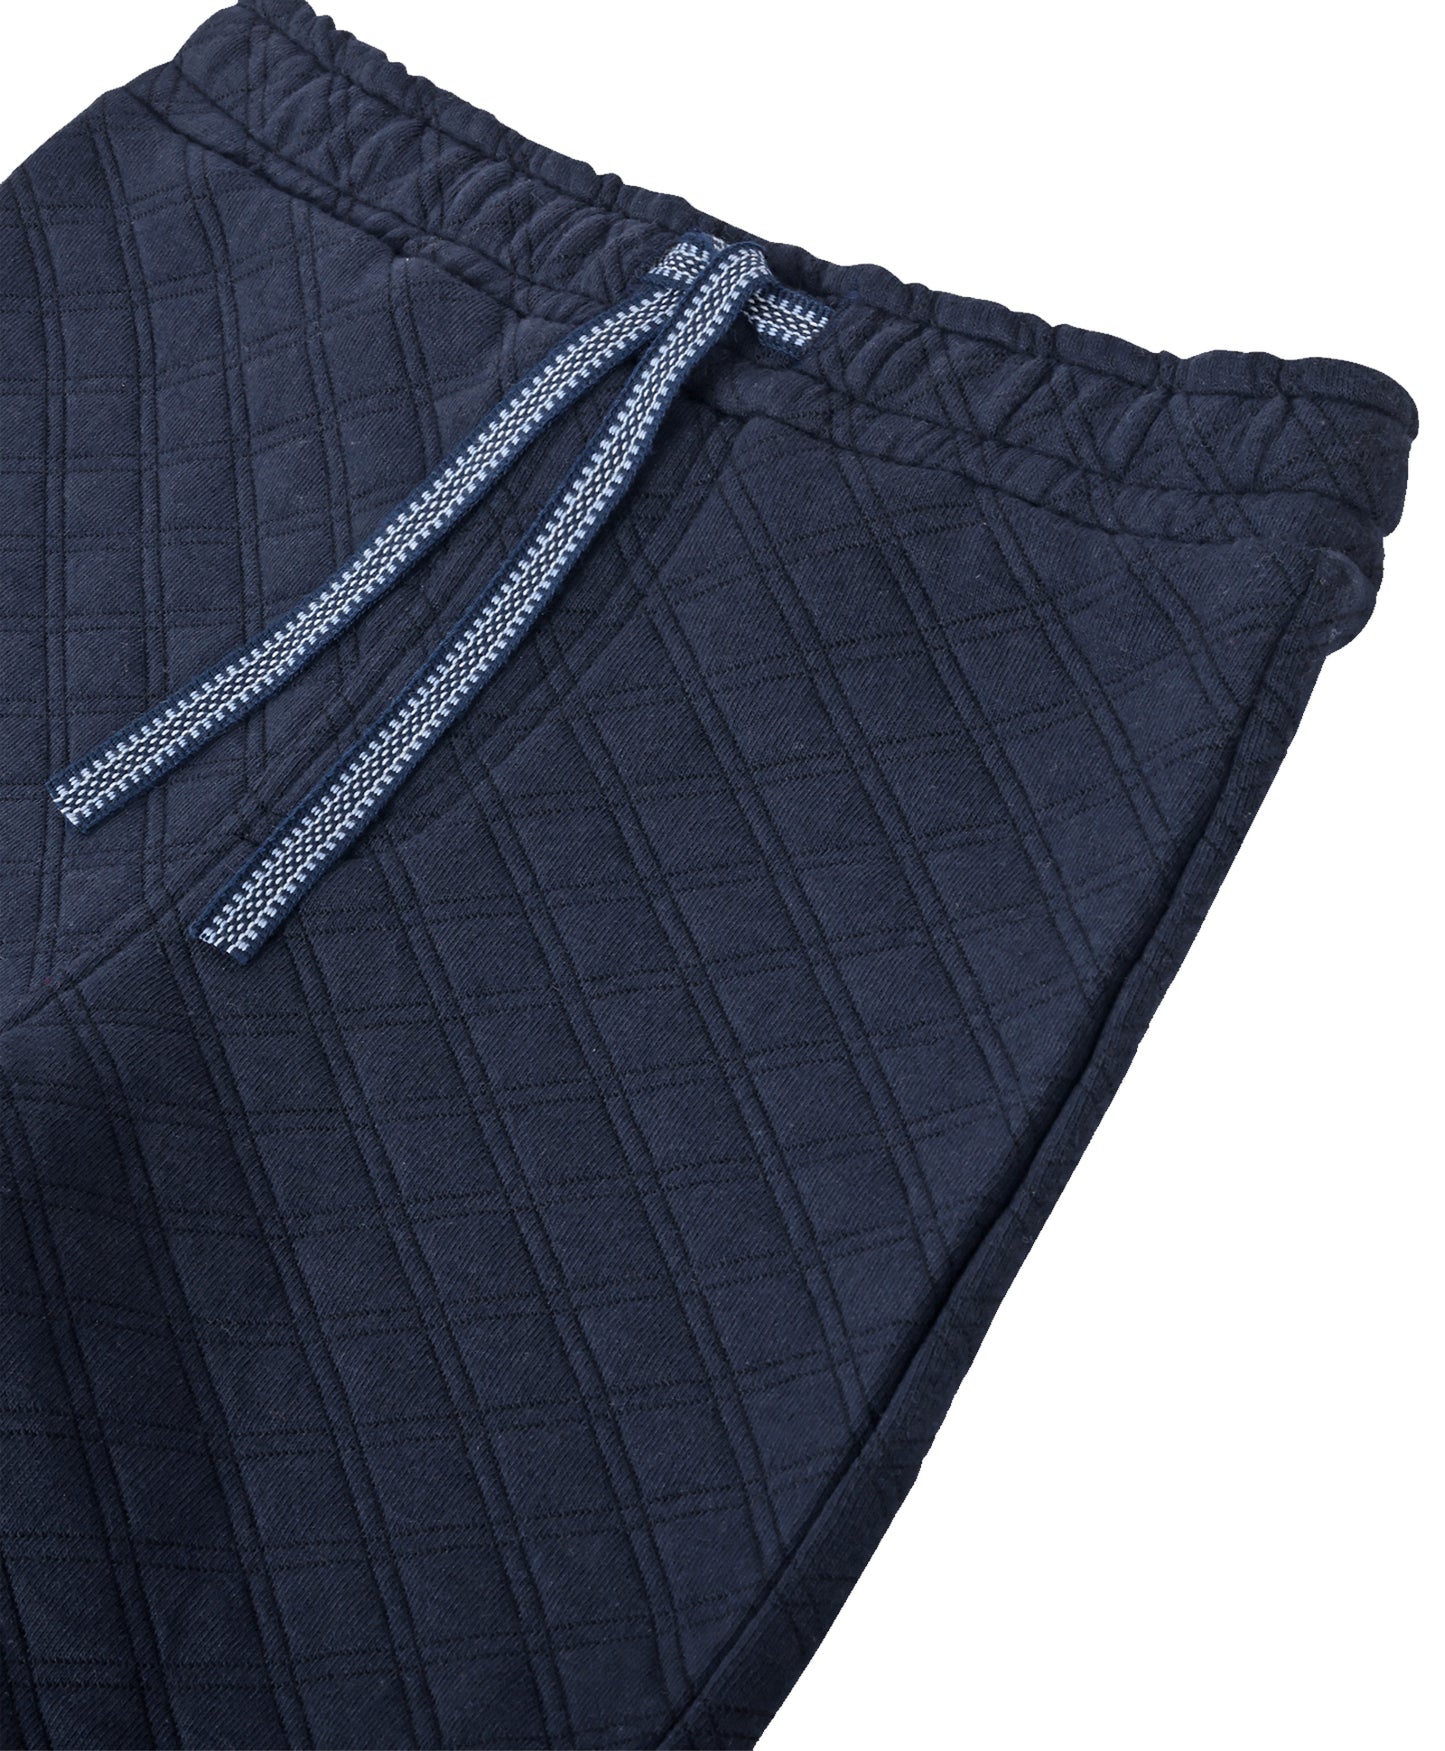 DAIMOND QUILTED NAVY BOYS SHORTS - NAVY